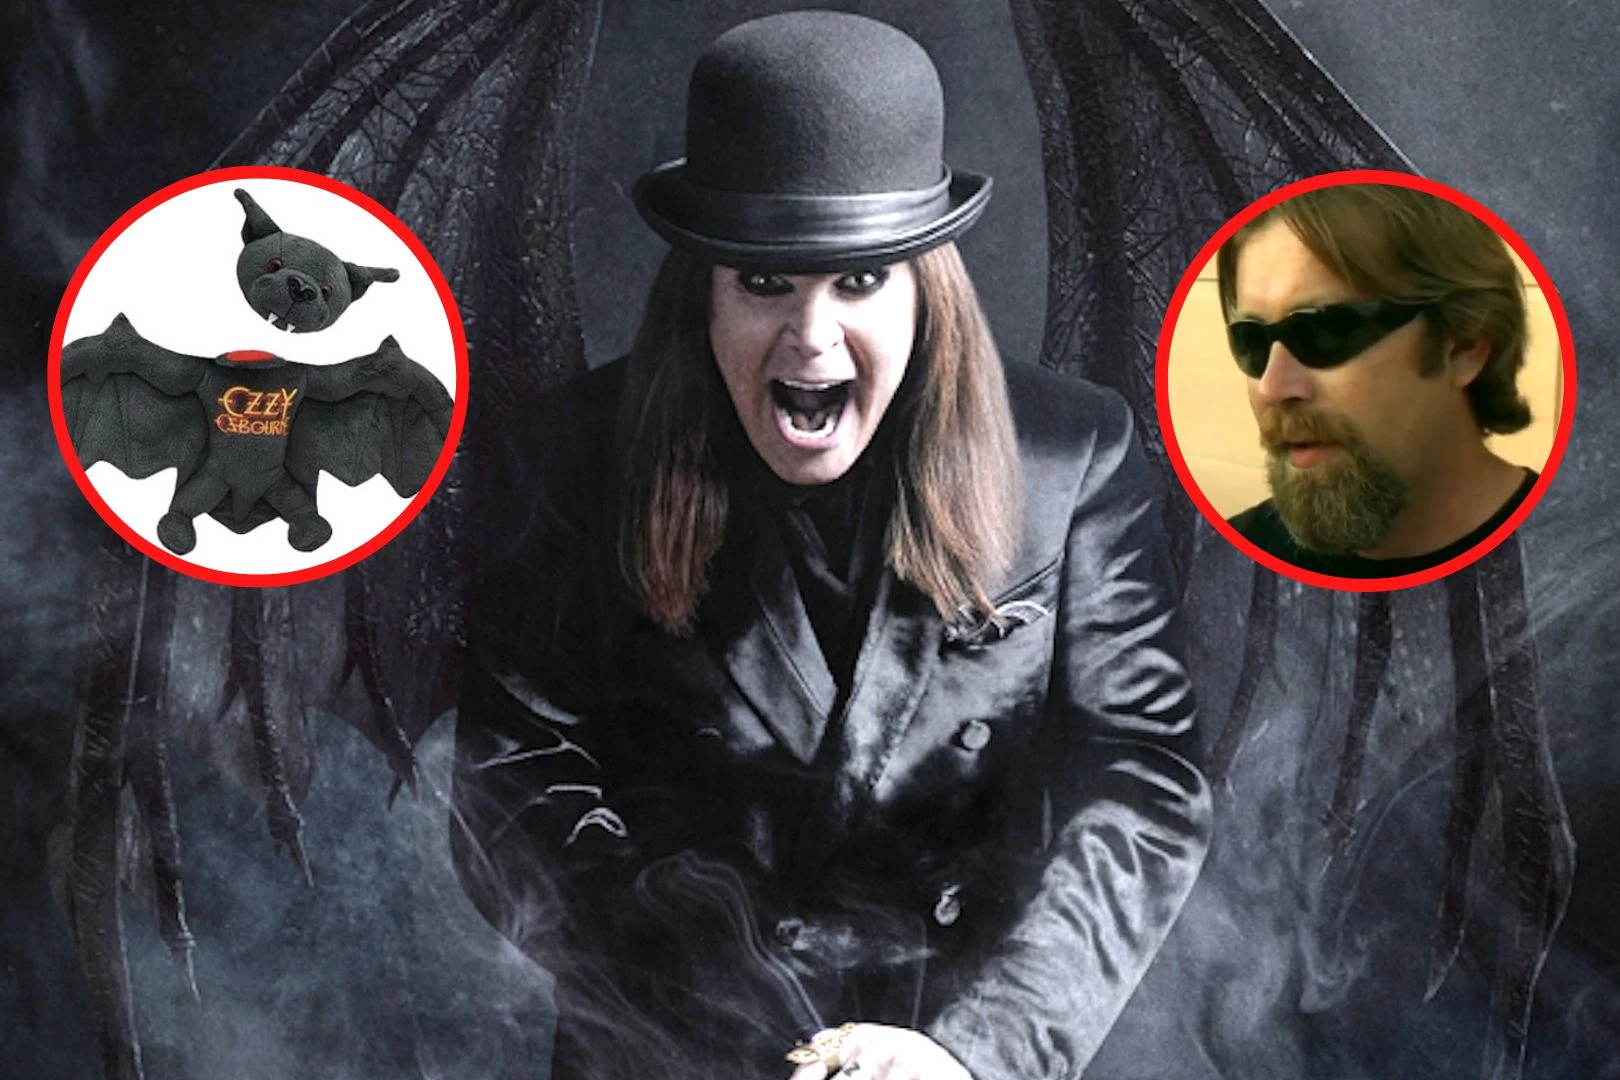 Ozzy Osbourne and the Bat Incident